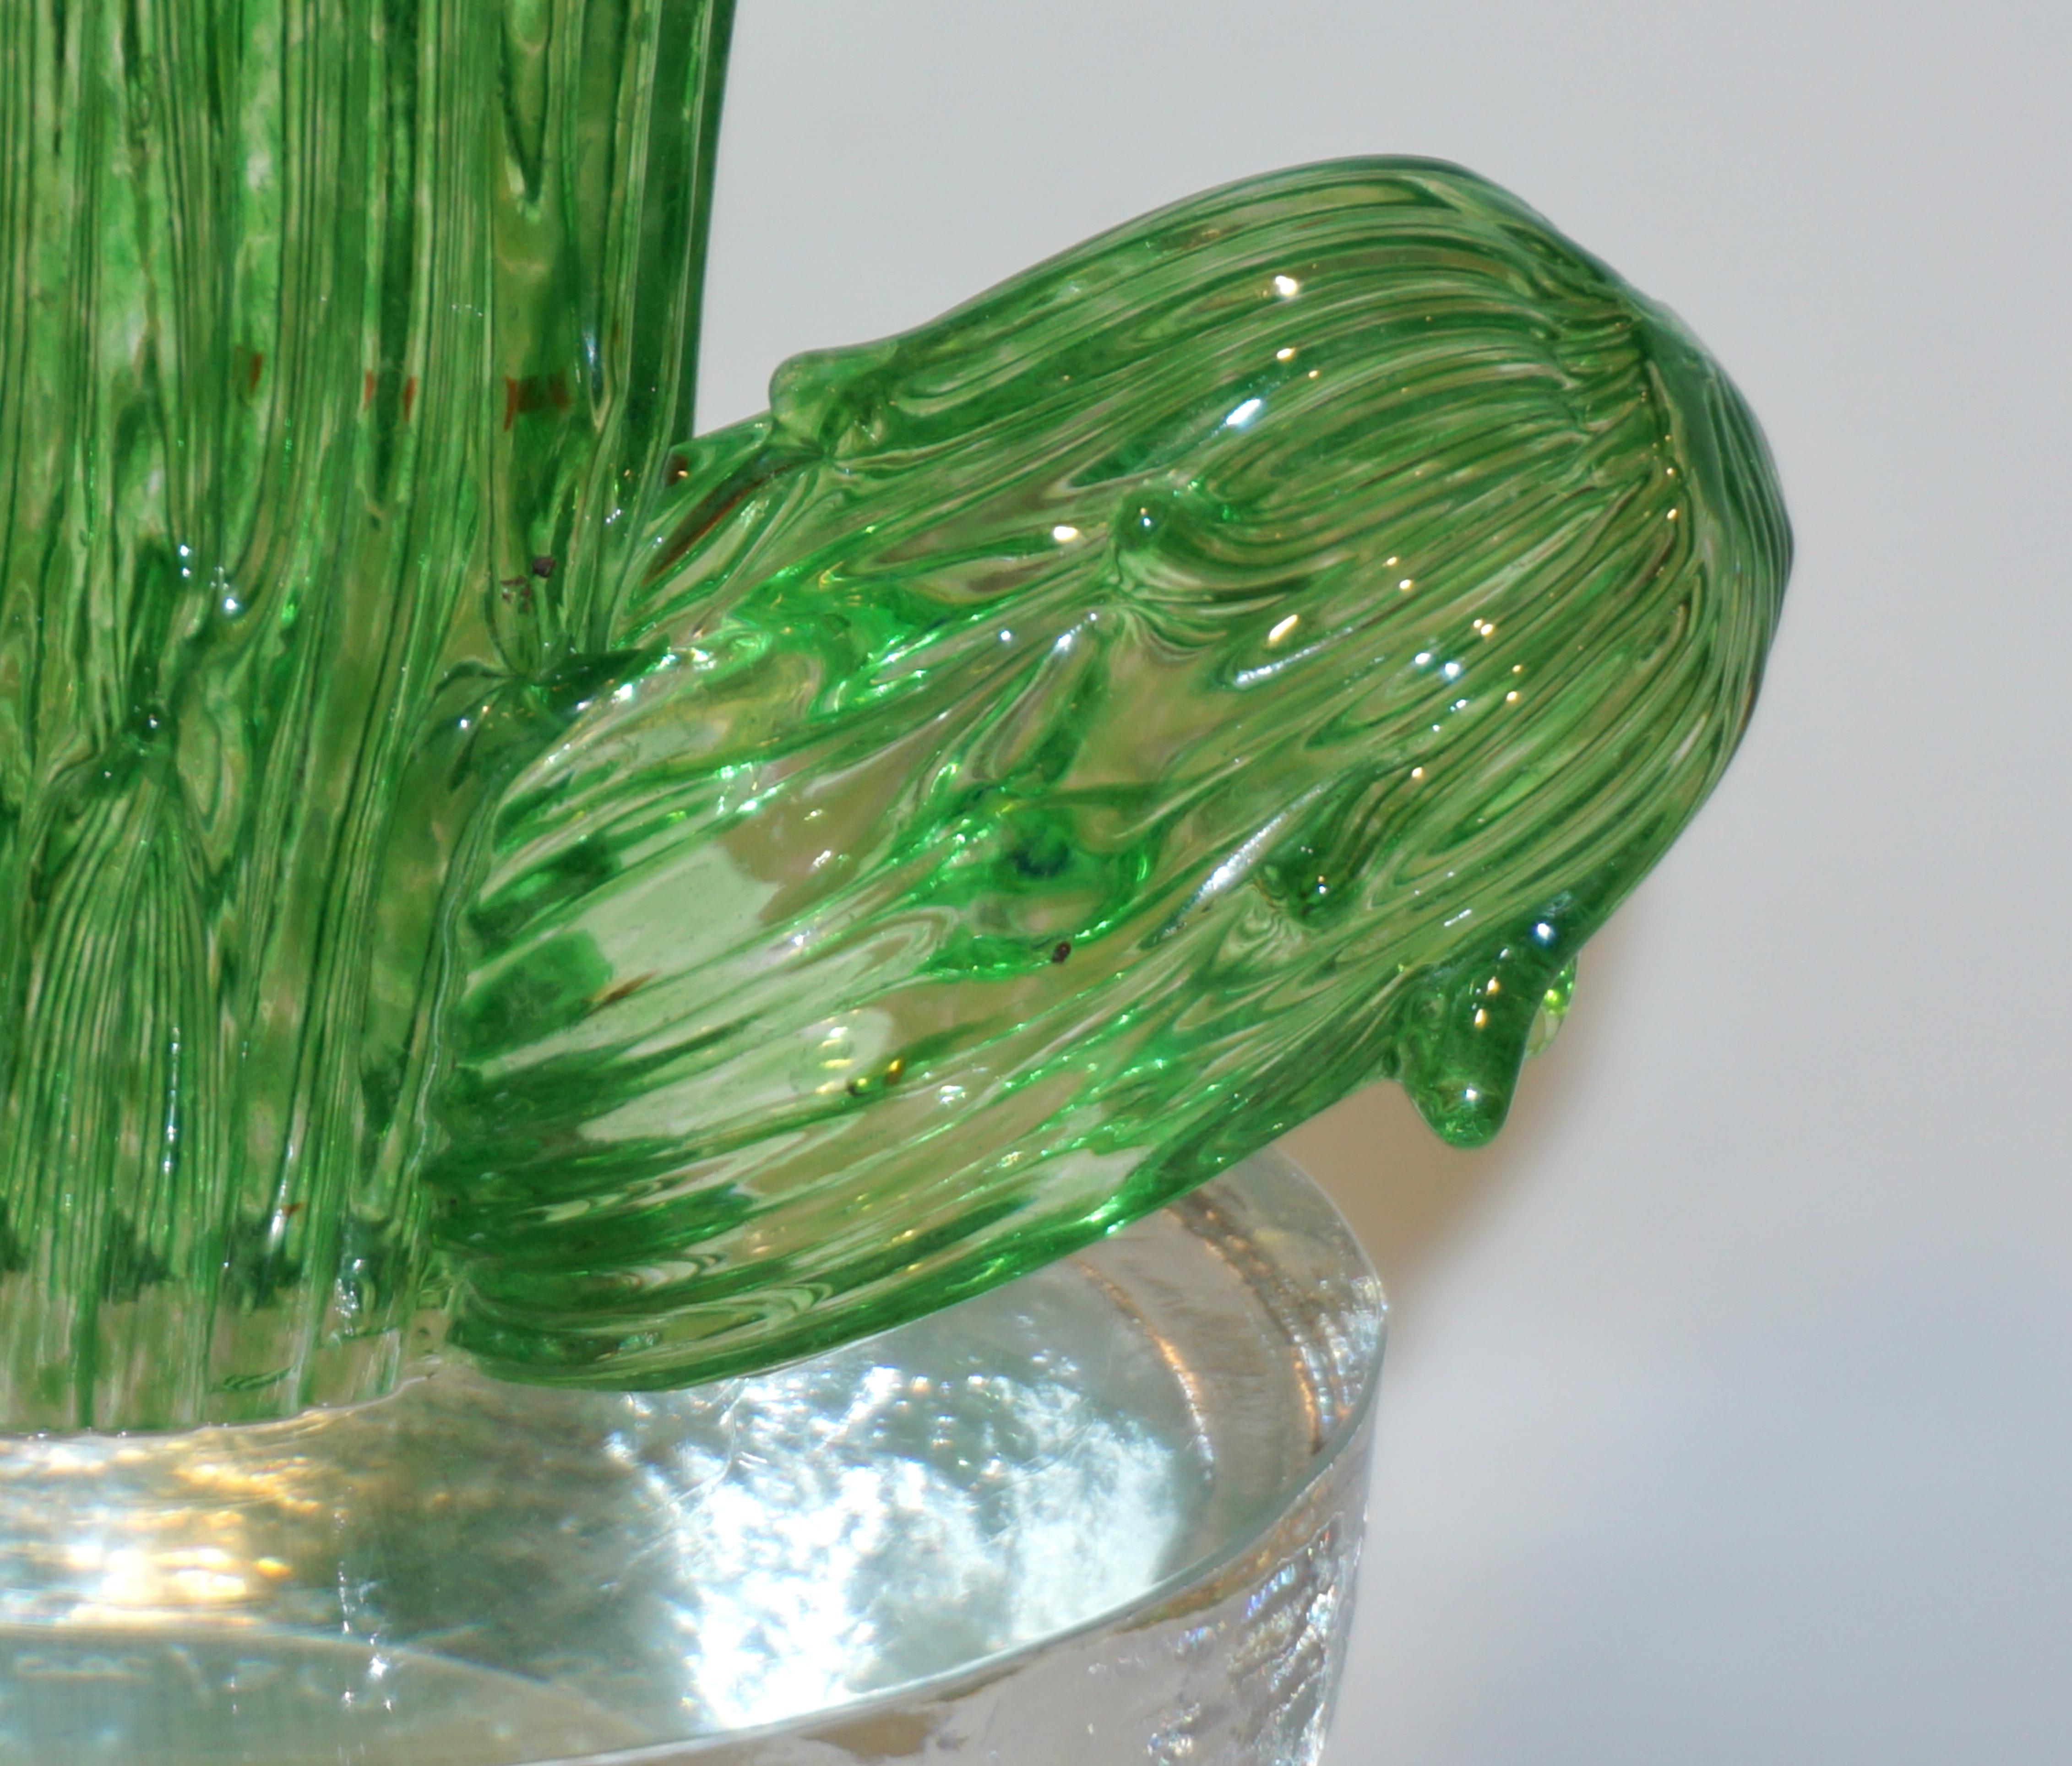 Hand-Crafted Formia Marta Marzotto Vintage Limited Edition Murano Glass Green Cactus Plant